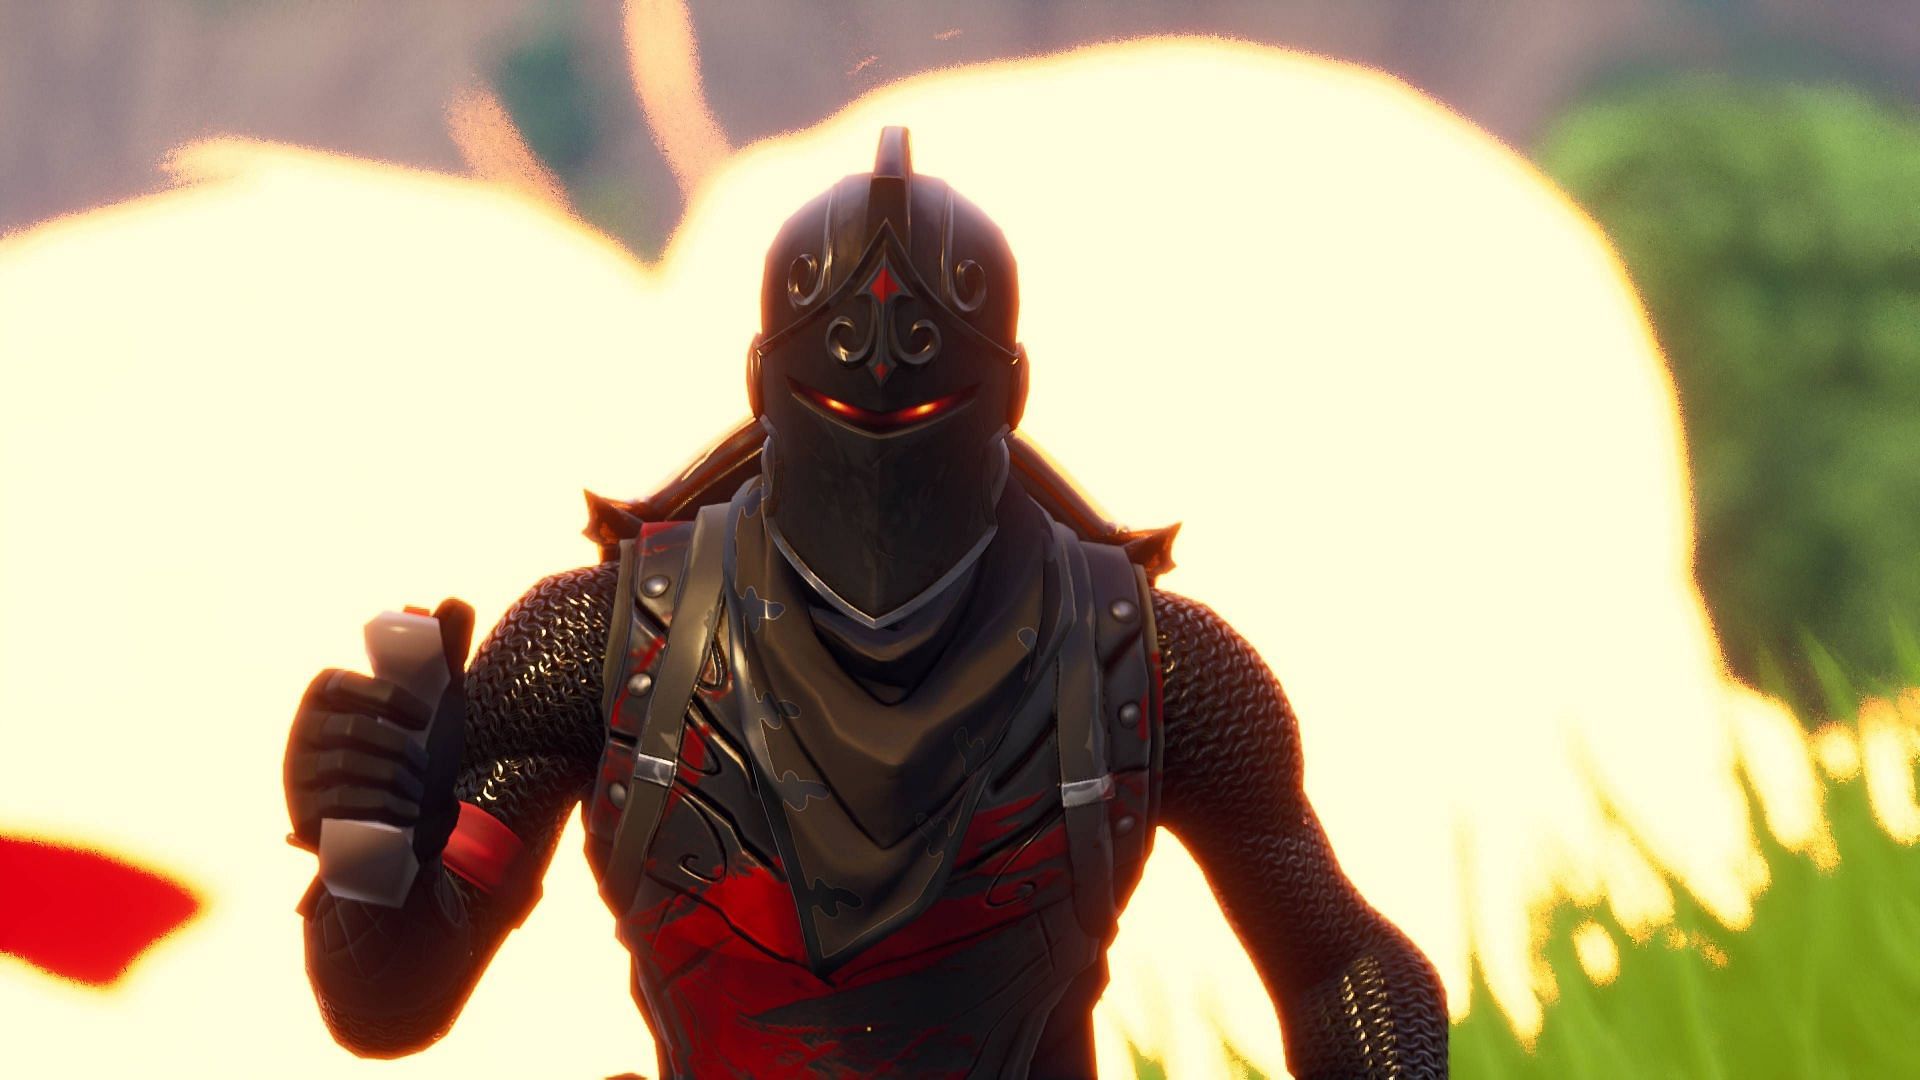 Black Knight is one of the most popular Fortnite skins of all time (Image via Epic Games)